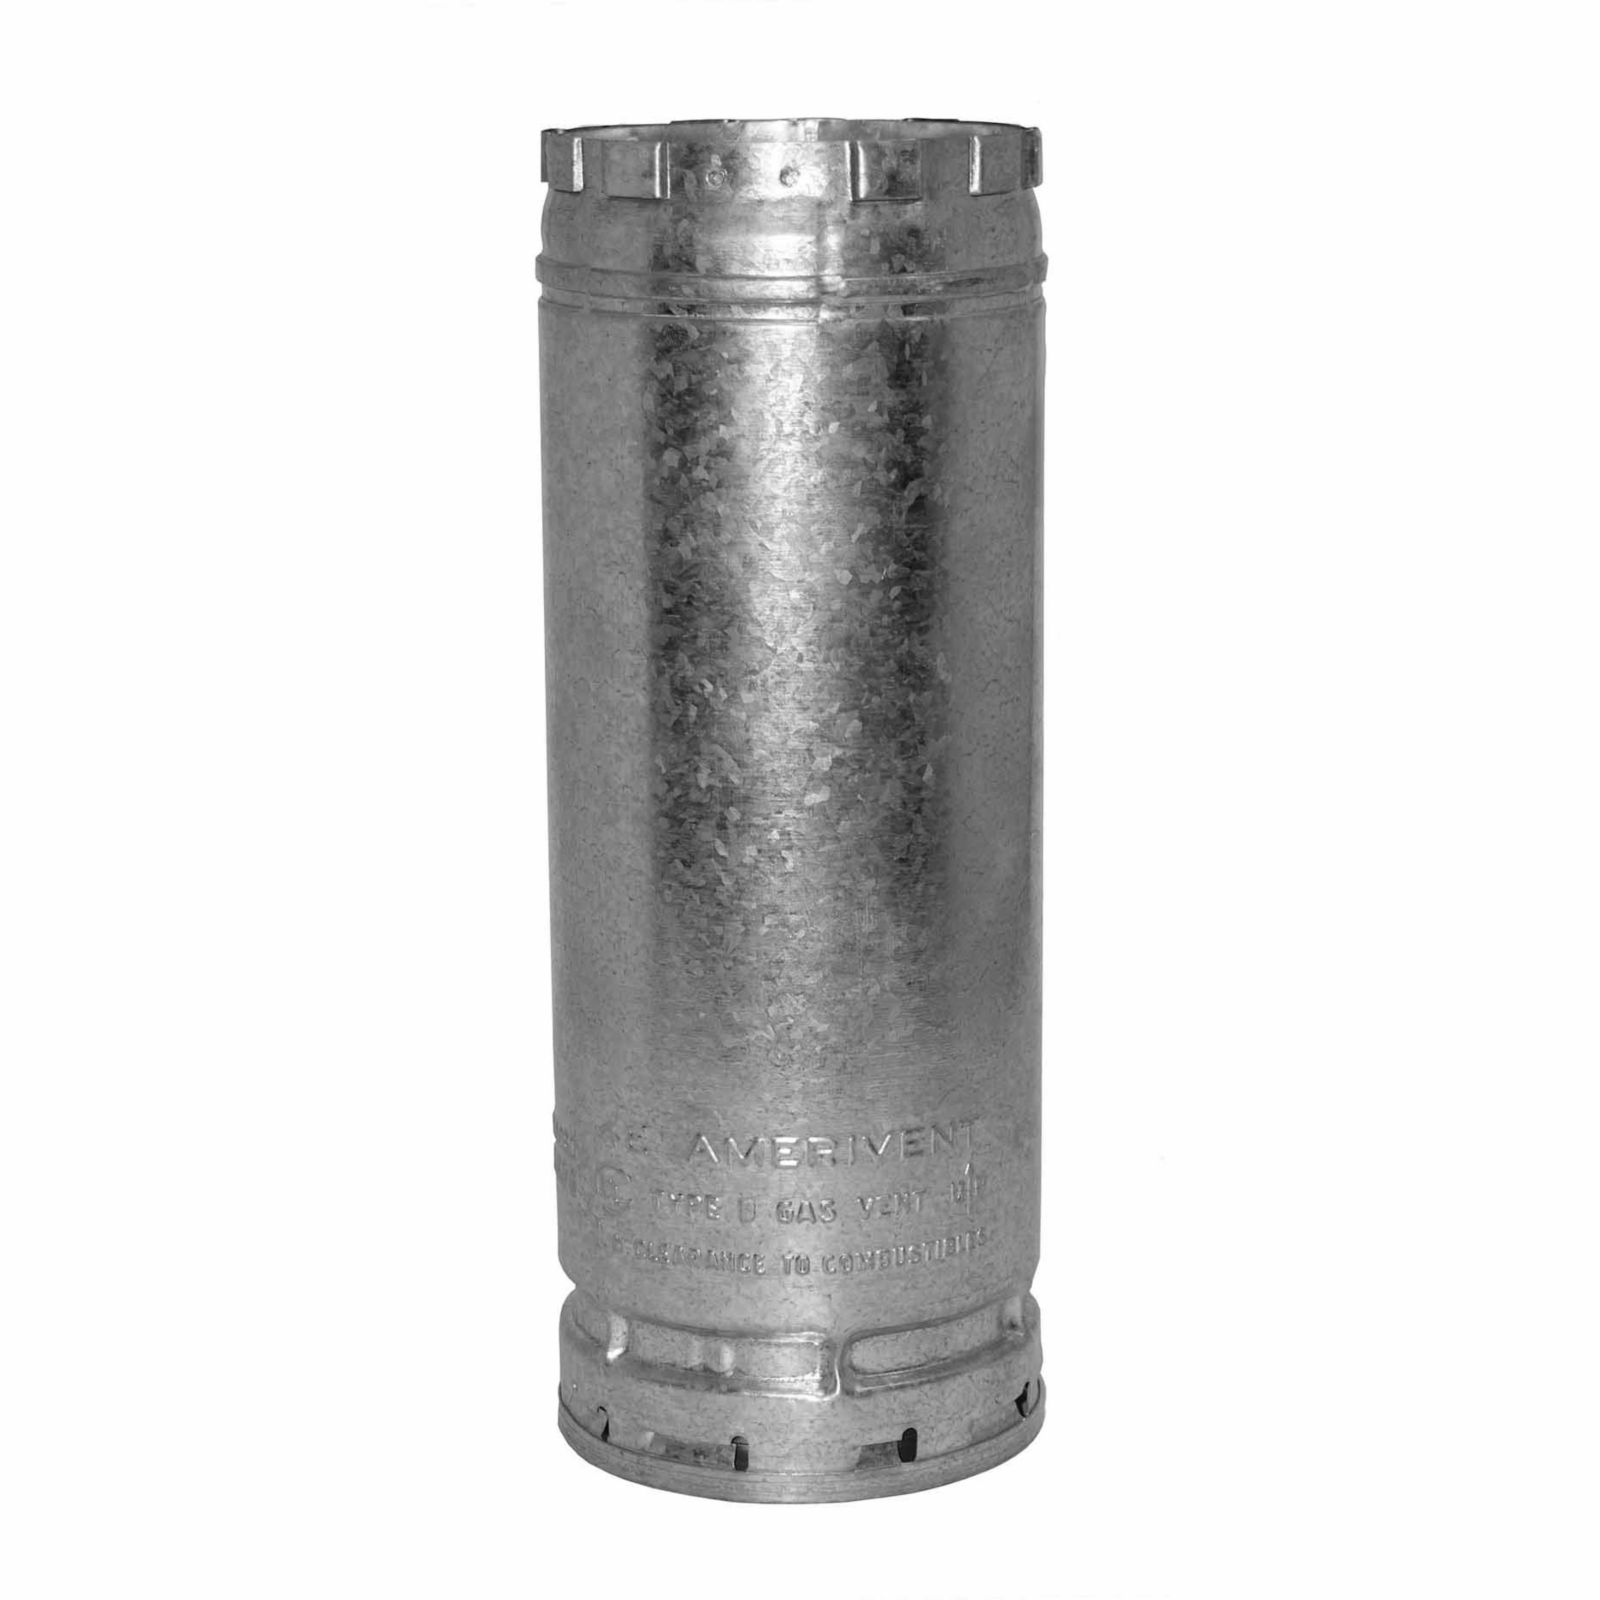 AmeriVent 3E6 - Pipe Section Type B Gas Vent, 3" Round X 6" Length